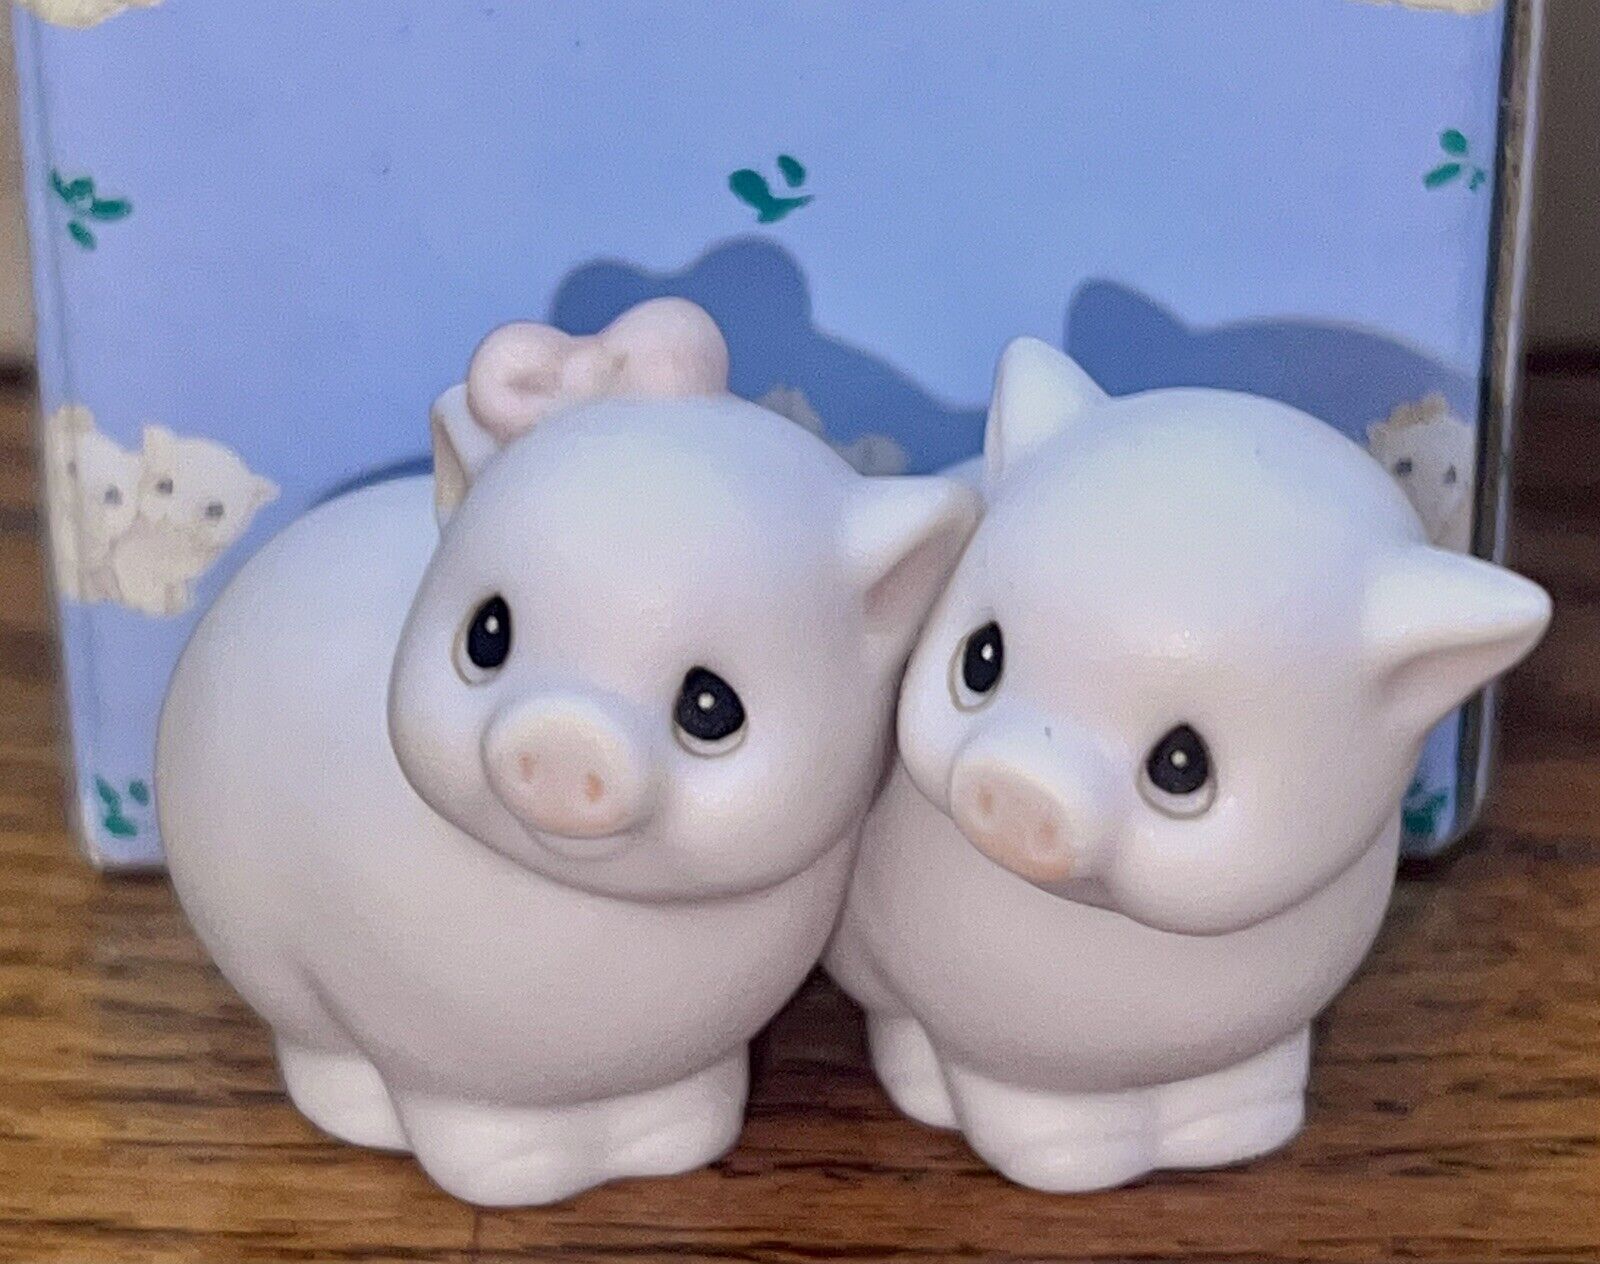 Buy 2 Get 1 Free Precious Moments-Two By Two Pigs 530085 Retired